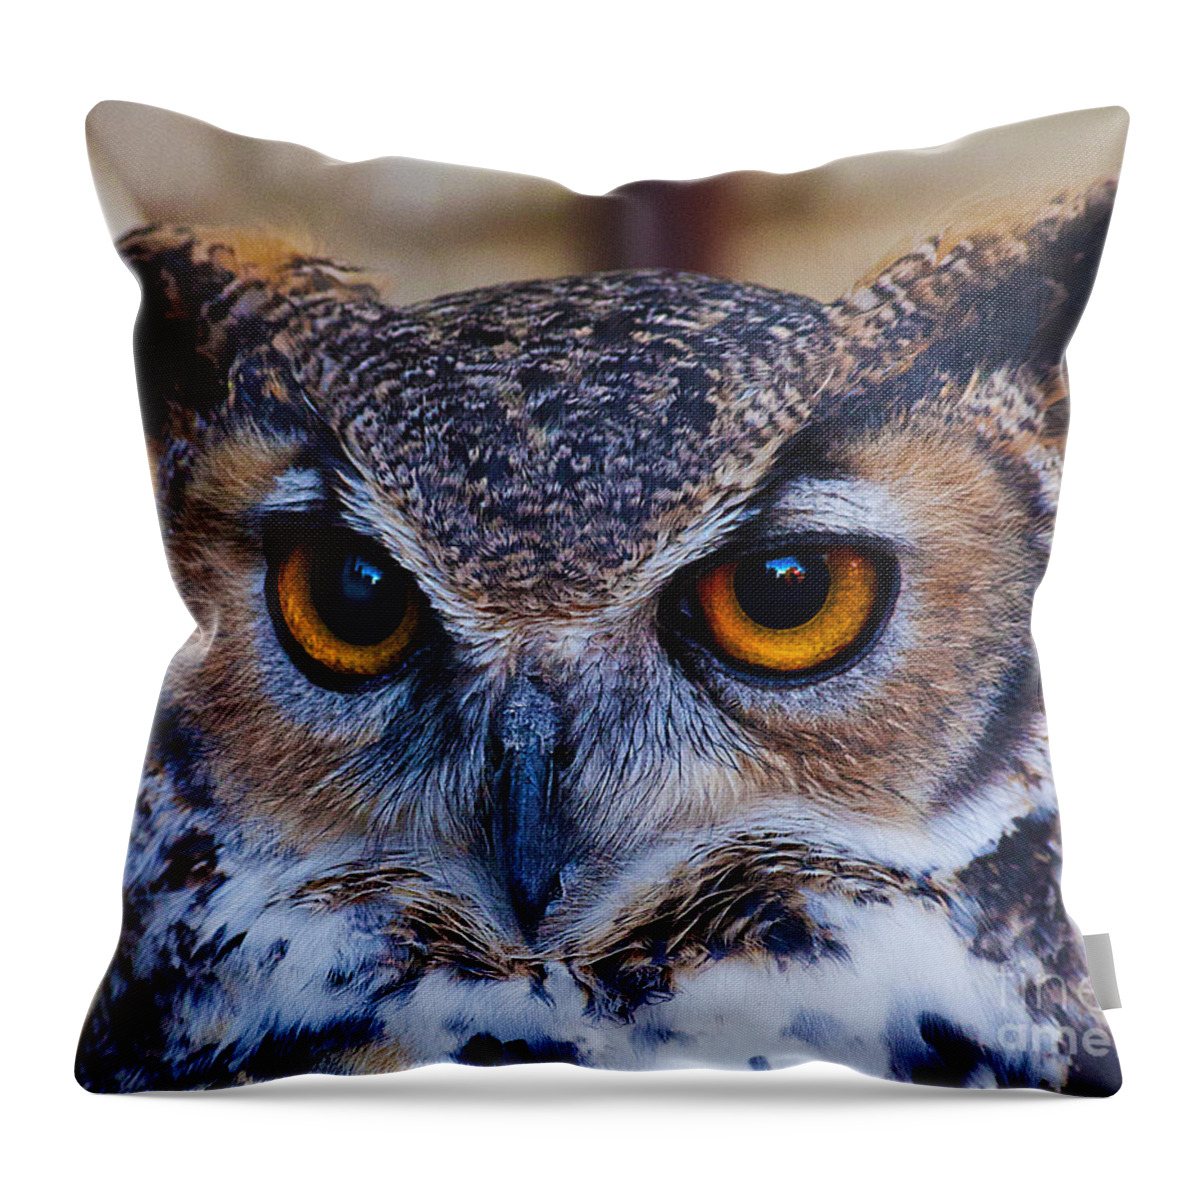 Wise Owl Photographs Print Throw Pillow featuring the photograph Yellow Eyed Wise Old Owl by Jerry Cowart